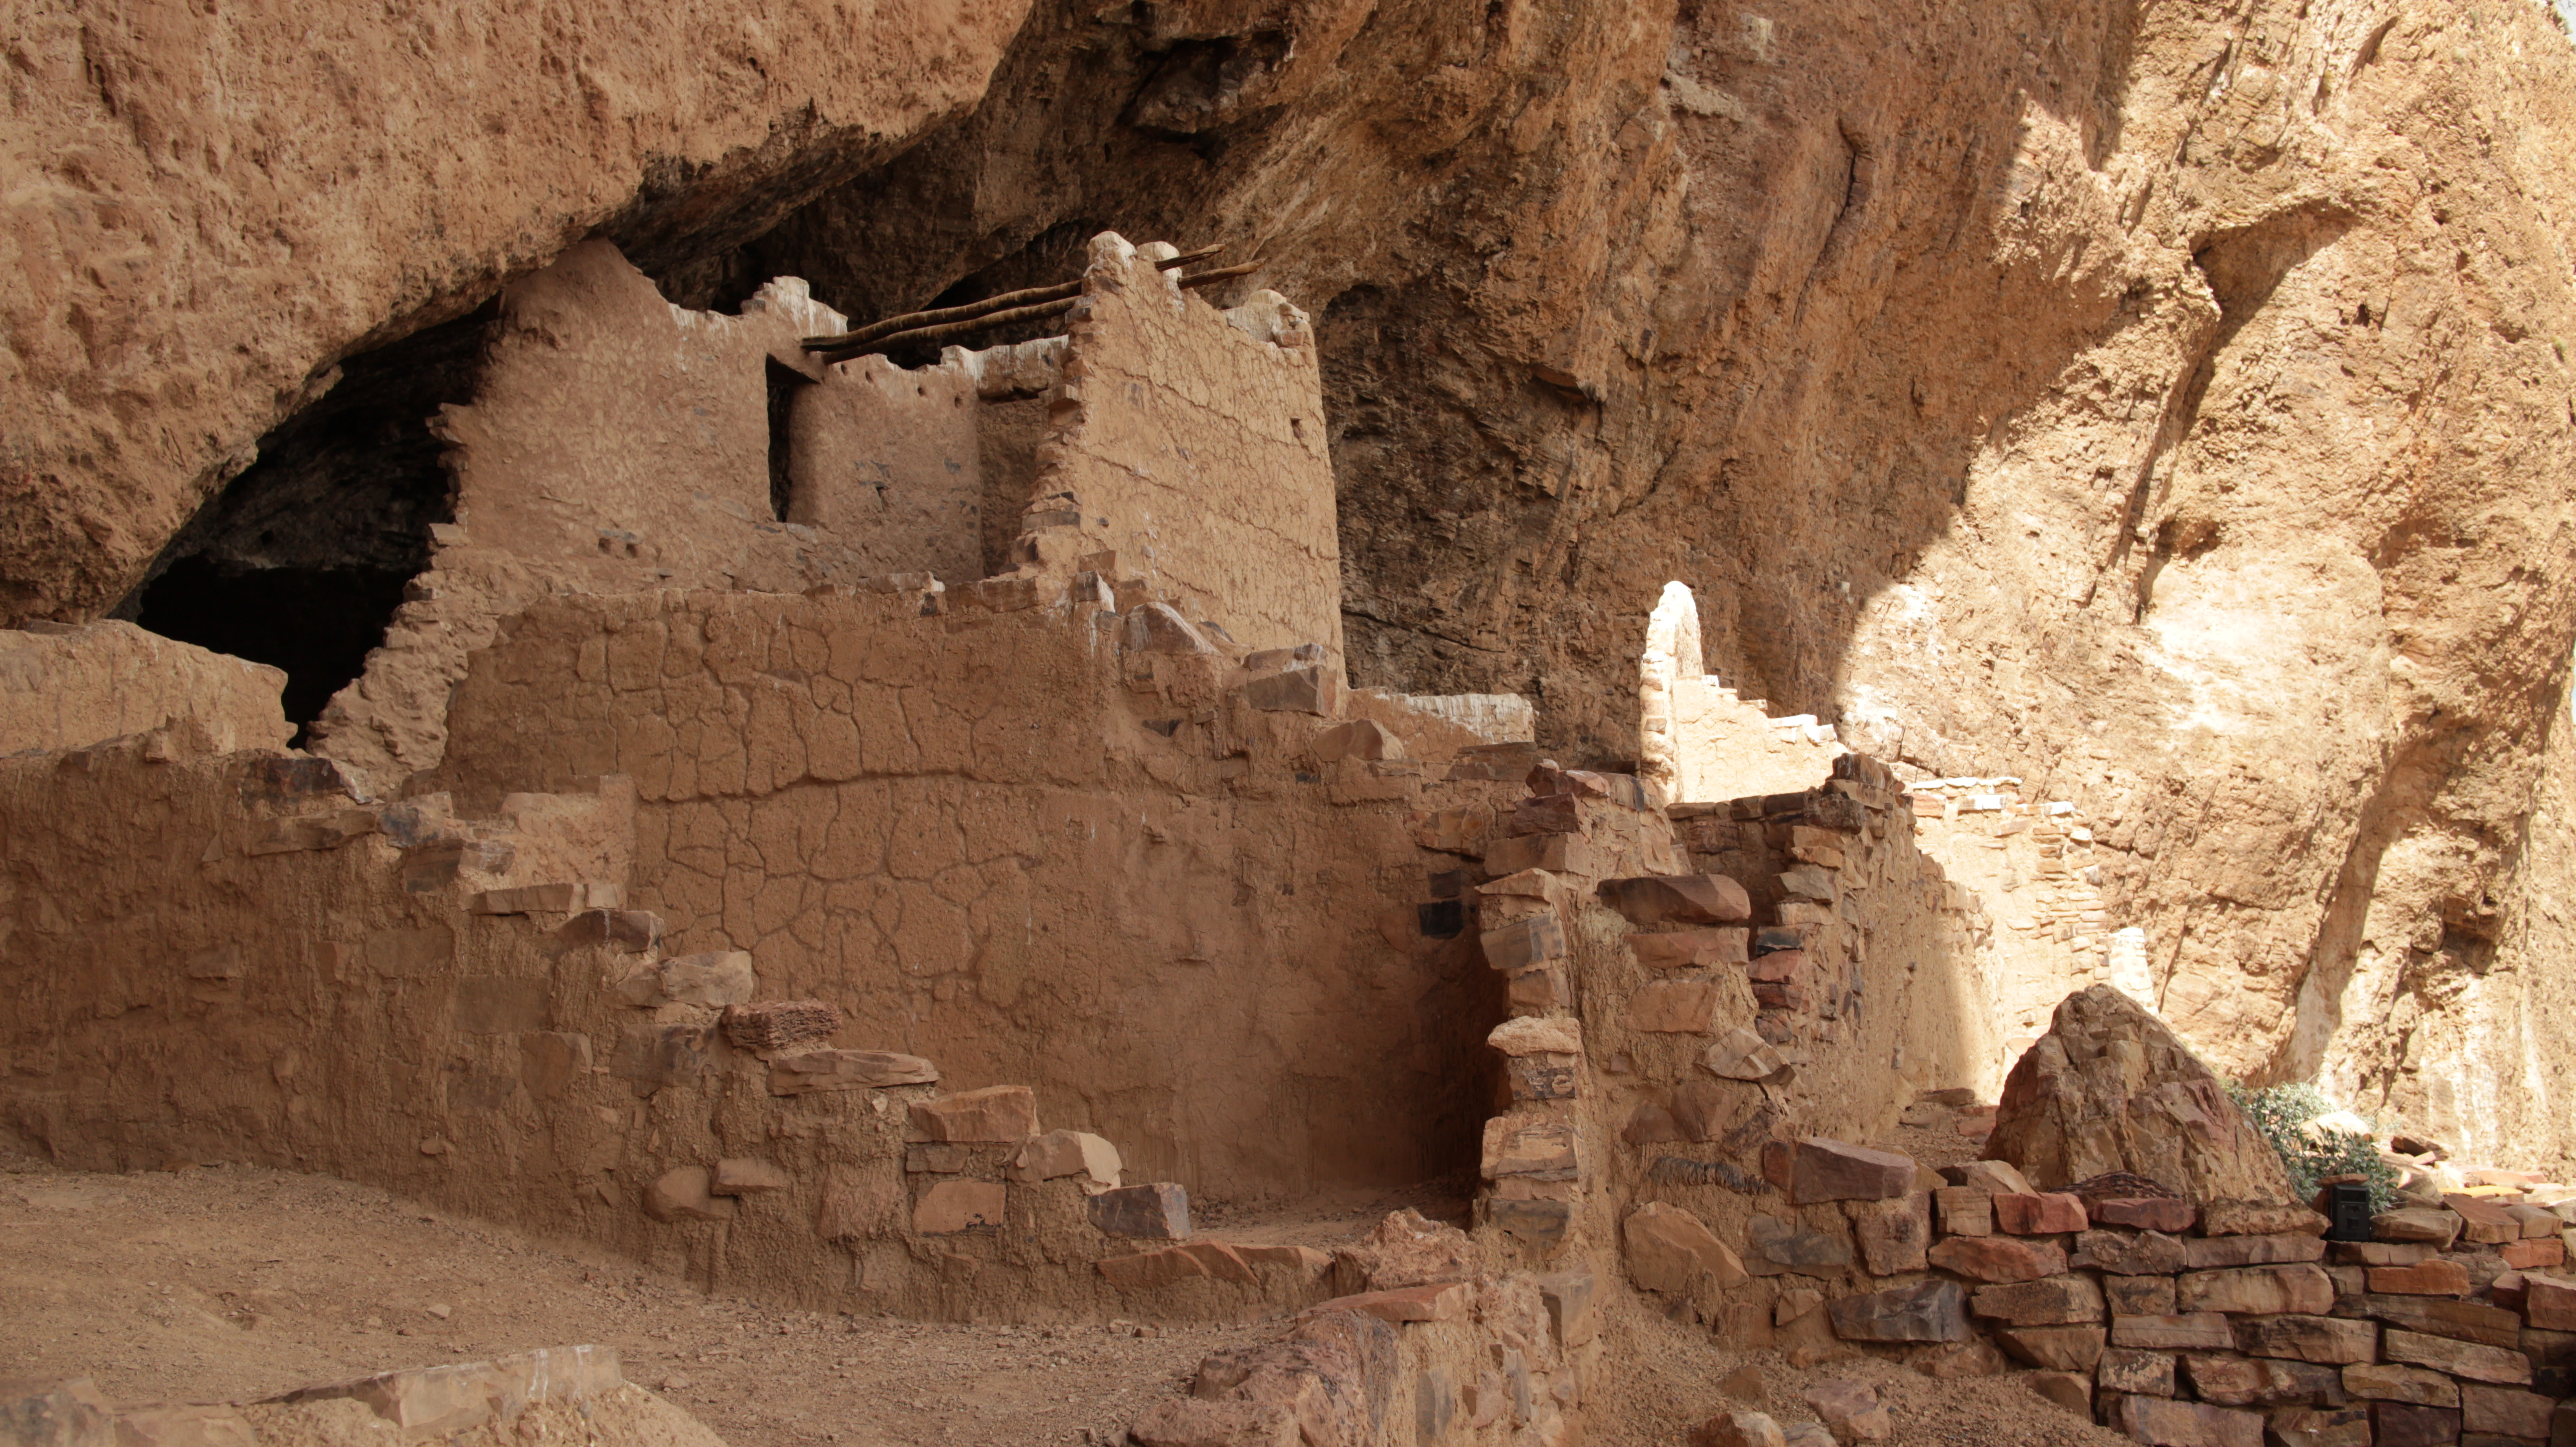 Two story rooms of the Upper Cliff Dwelling.